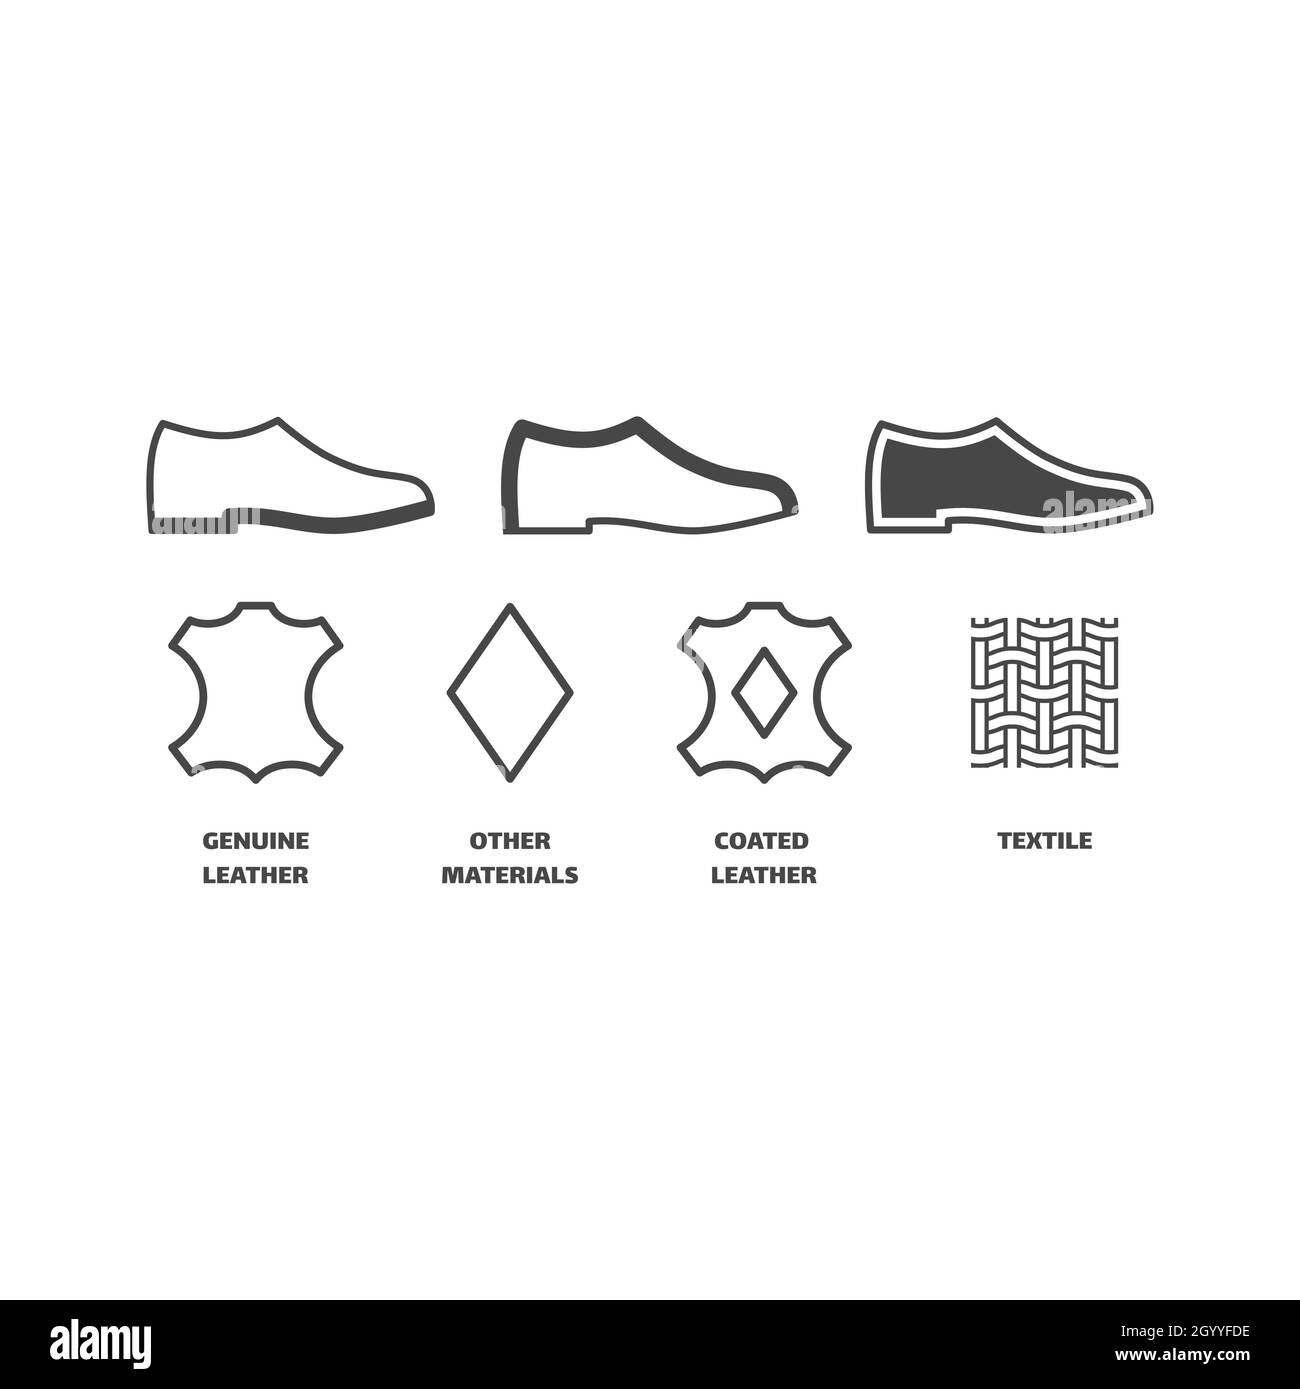 Shoe materials black vector icon set. Shoes with genuine leather, textile symbols. Stock Vector